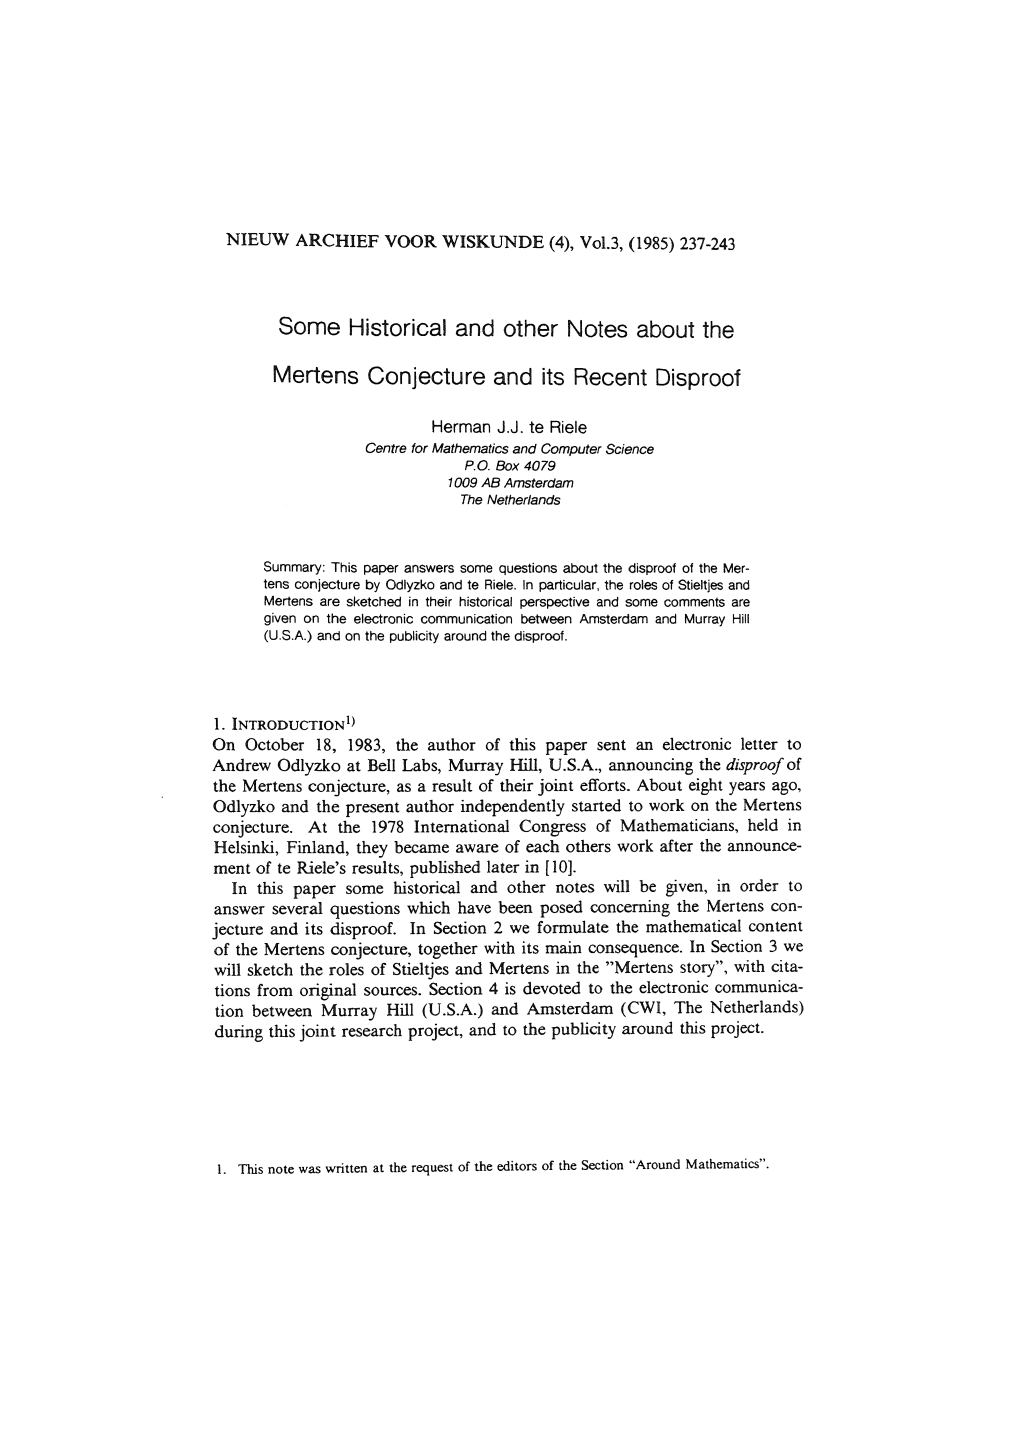 Some Historical and Other Notes About the Mertens Conjecture And